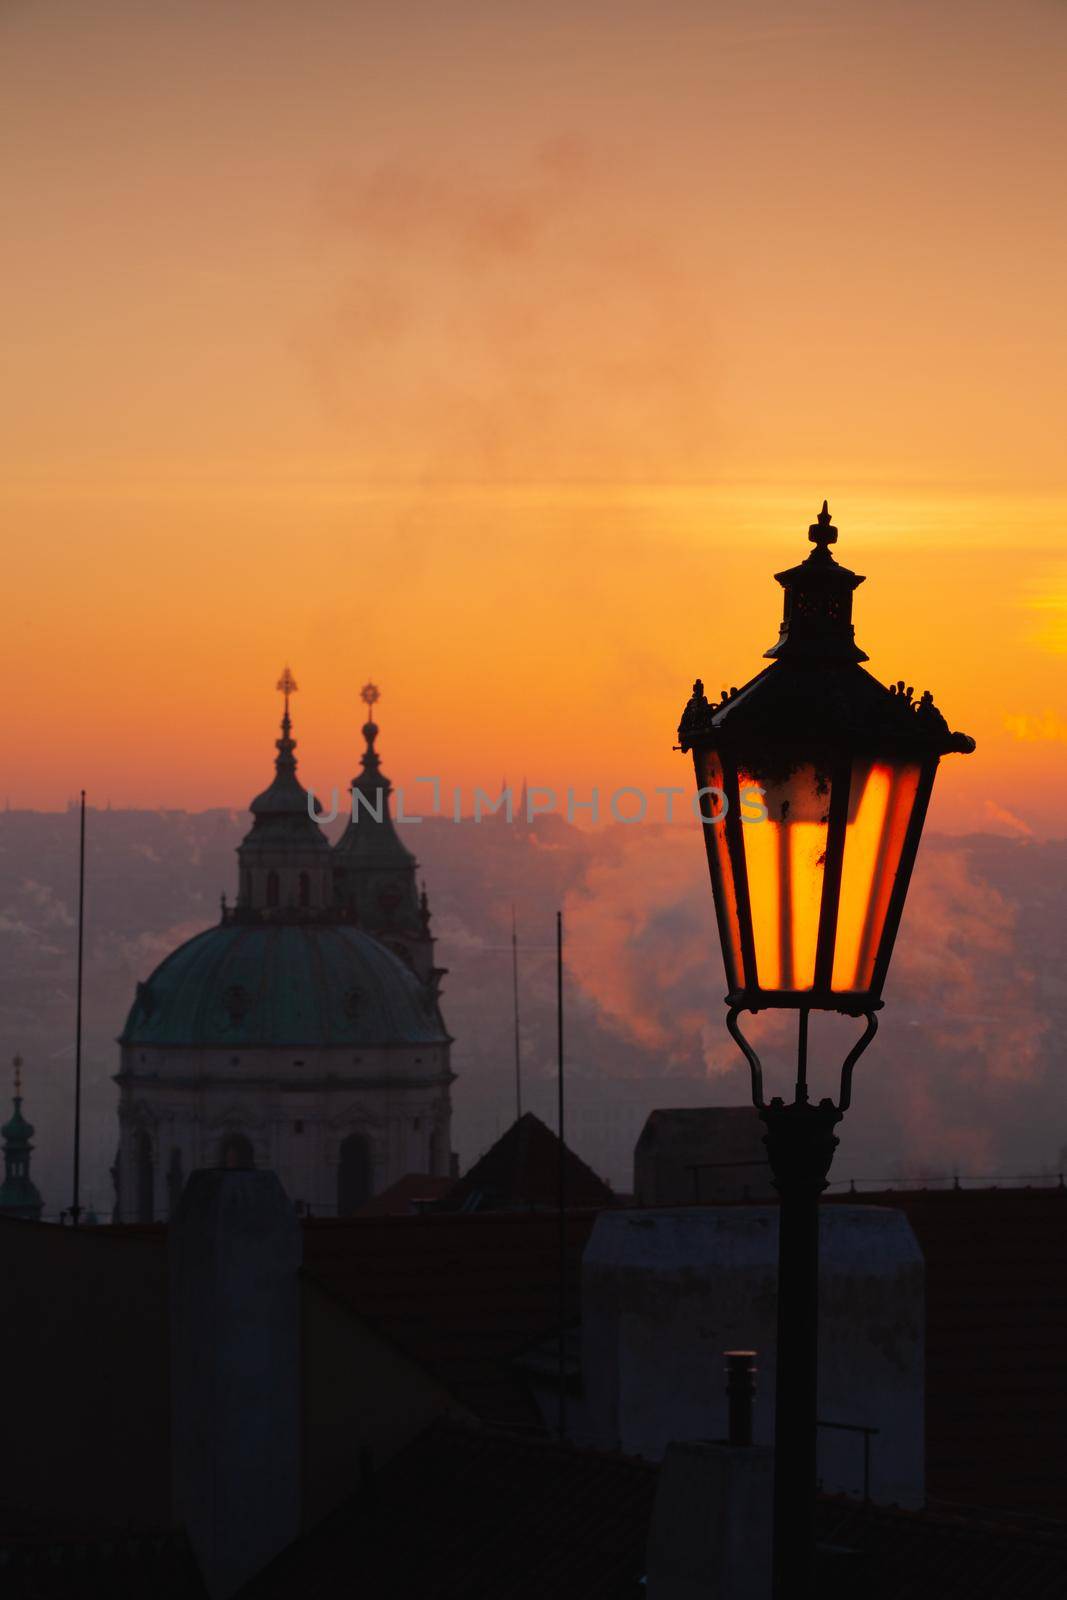 Sunrise behind an old street lamp over Lesser Town, Prague, Czech Republic. Lesser Town is a hillside area with views across the Vltava river to the old town.